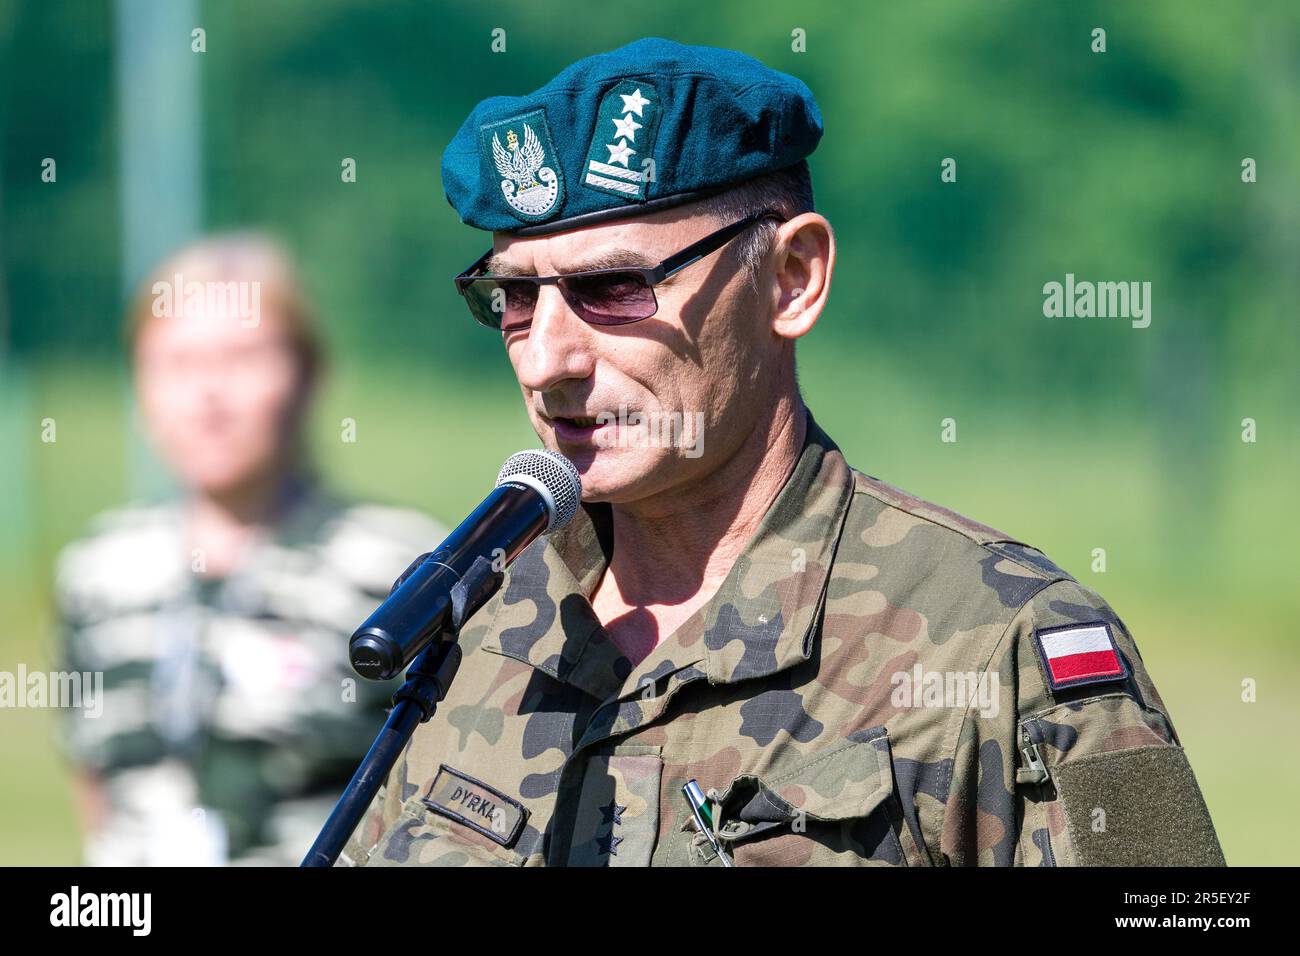 03 June 2023, Poland, Gubin: Colonel Grzegorz Dyrka, commander of the Zielona Gora branch of the Polish Army's Central Military Recruitment Center, delivers a speech at the opening of the 26th Oderland March. For the 26th German-Polish Oderland March, 87 teams as well as 39 individual starters, a total of about 500 participants from the German Armed Forces, police and fire department as well as the armed forces from Poland, the Czech Republic, France, Latvia and the USA have registered. The participants will run 10 km, cross the border river Neisse, shoot with sporting rifles and transport inj Stock Photo